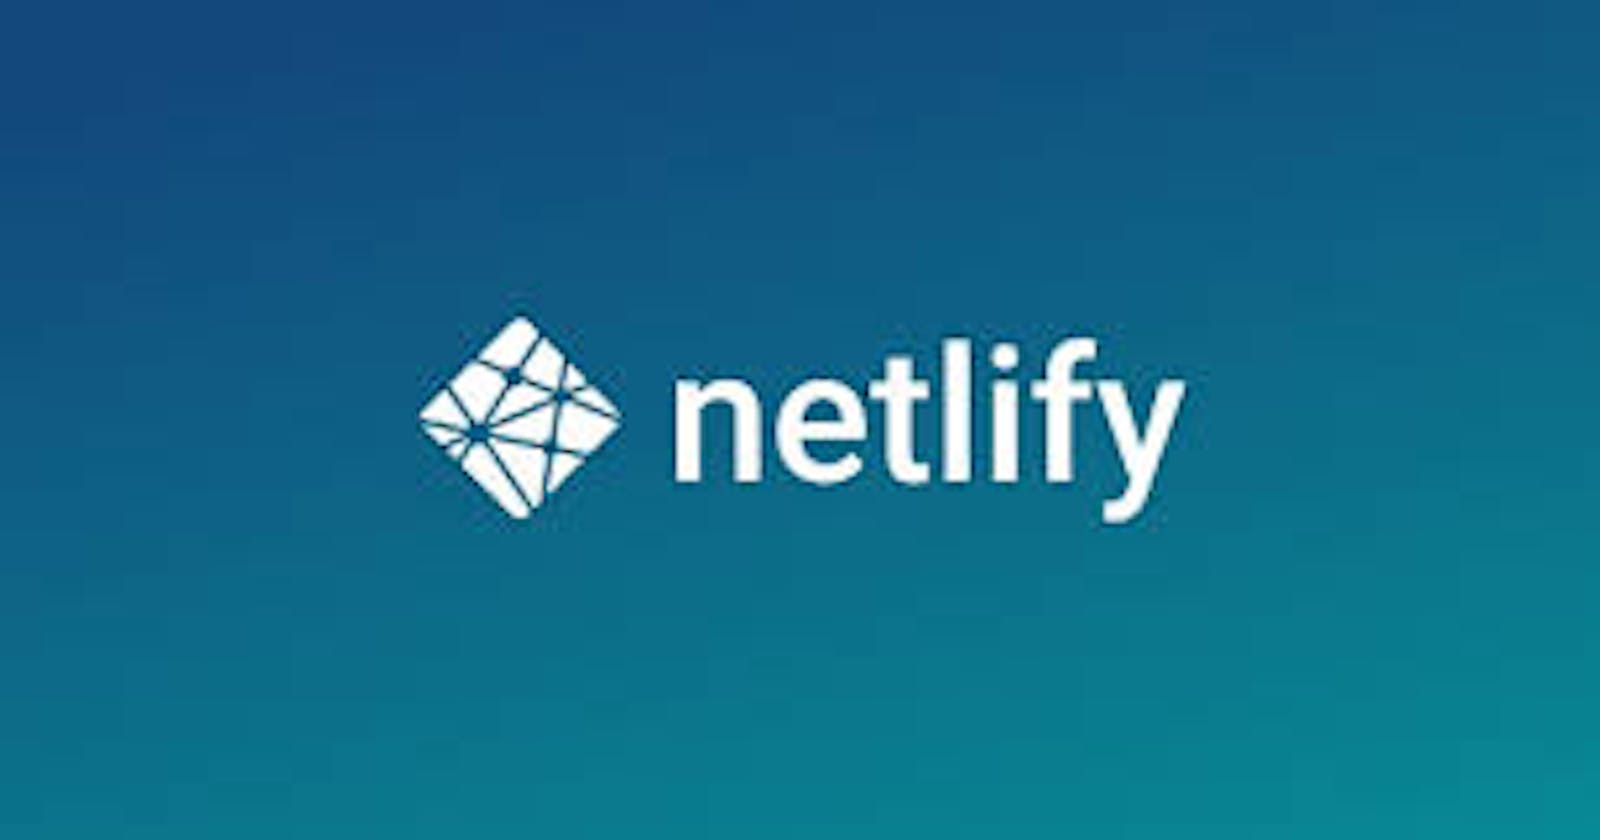 How To Host Your Webpage On Netlify